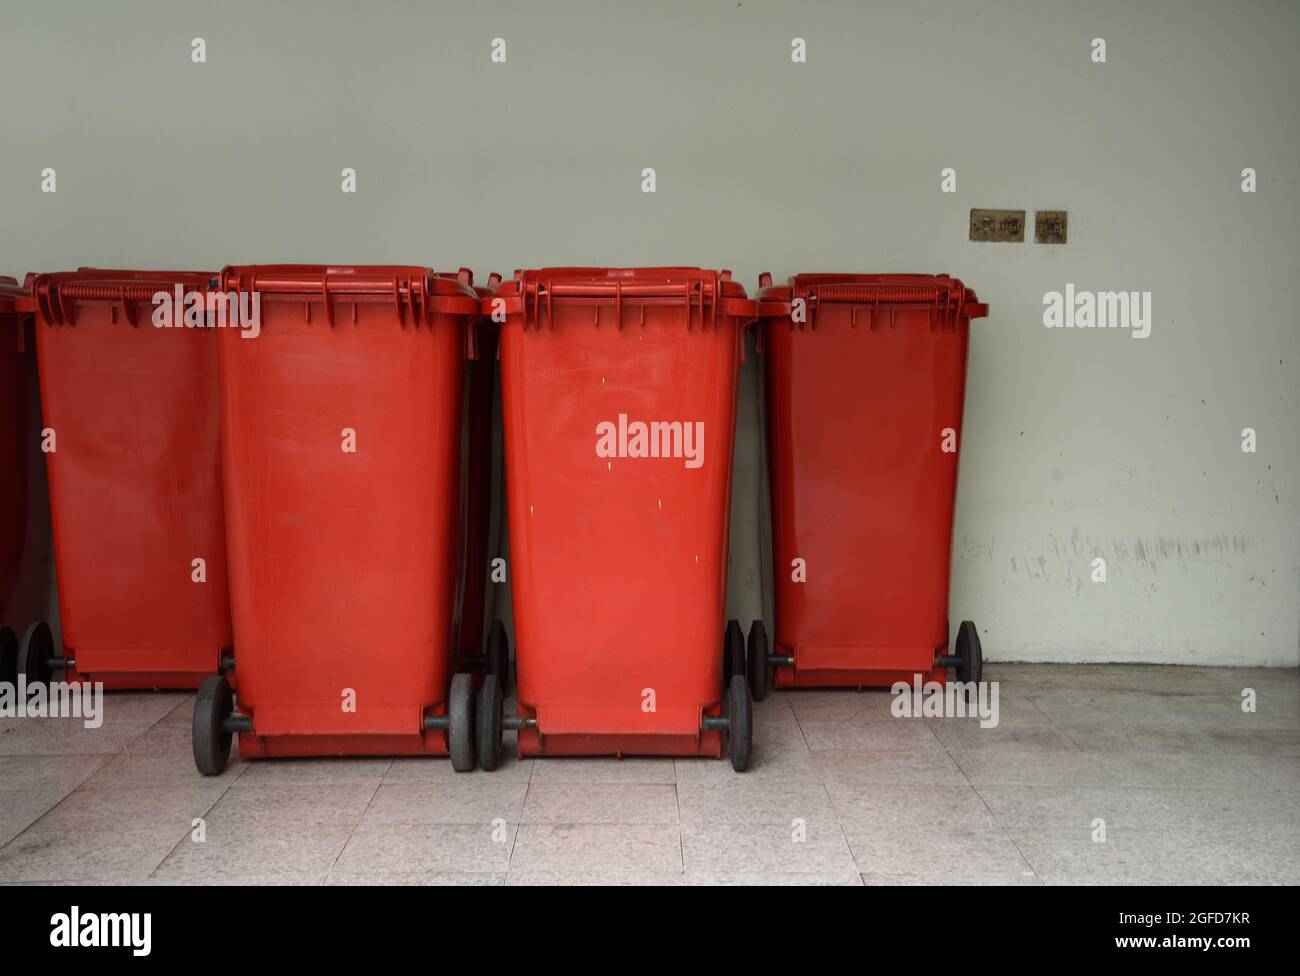 https://c8.alamy.com/comp/2GFD7KR/red-garbage-bins-for-infectious-waste-placed-indoor-in-hospital-2GFD7KR.jpg